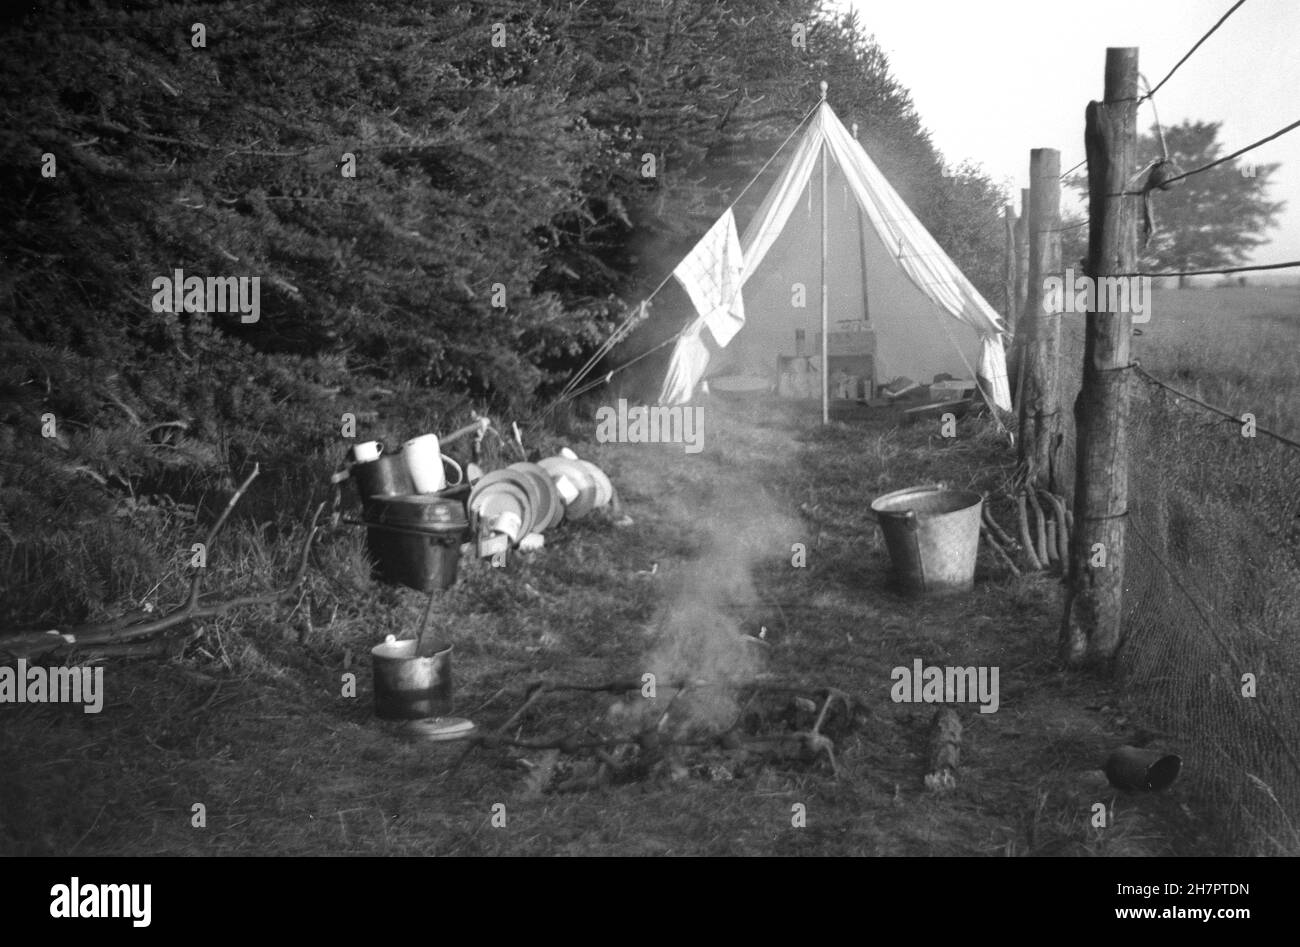 1937, historical, scout camp, a camp kitchen in a cleared area next to a wood and beside a fenced field, with a tent, fire and cooking utensils, Ranmore, North Downs, Surrey, England, UK. Stock Photo